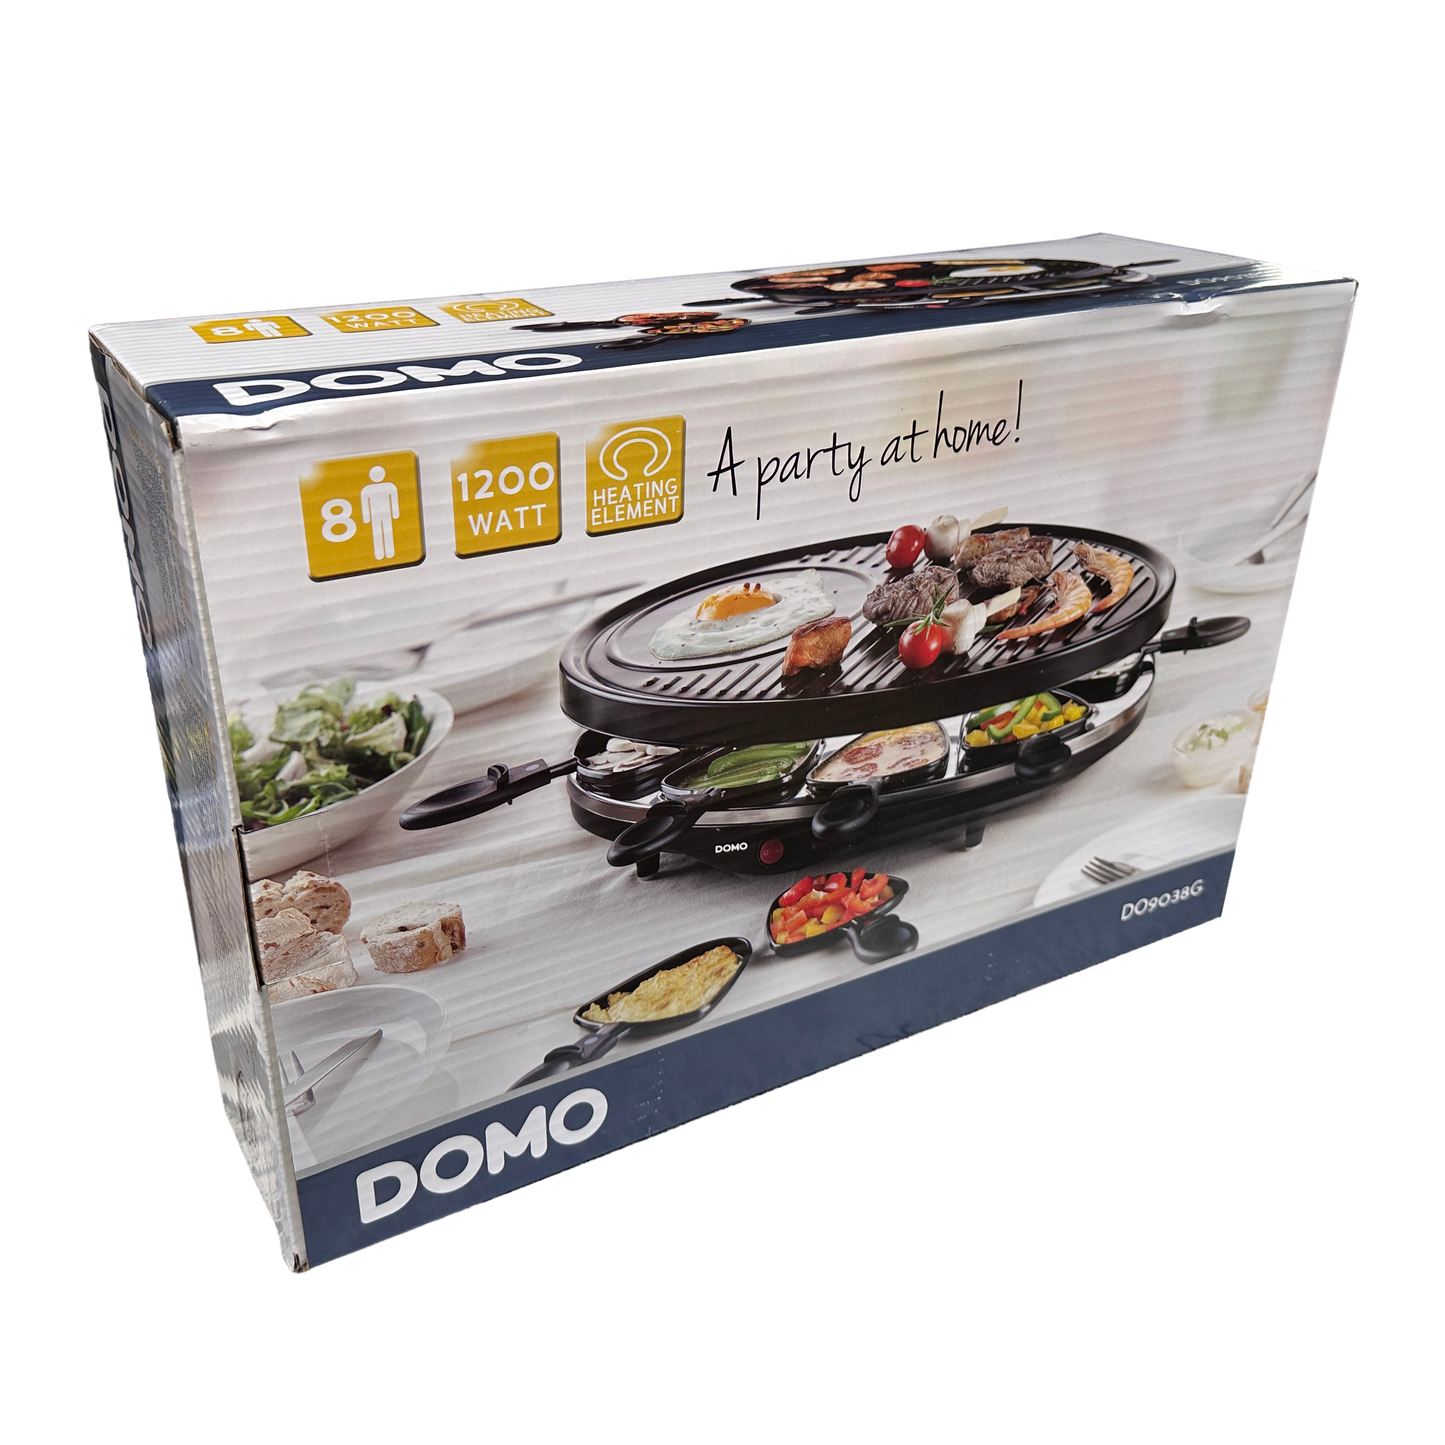 Domo DO9038G Gourmet Box - Raclette grill